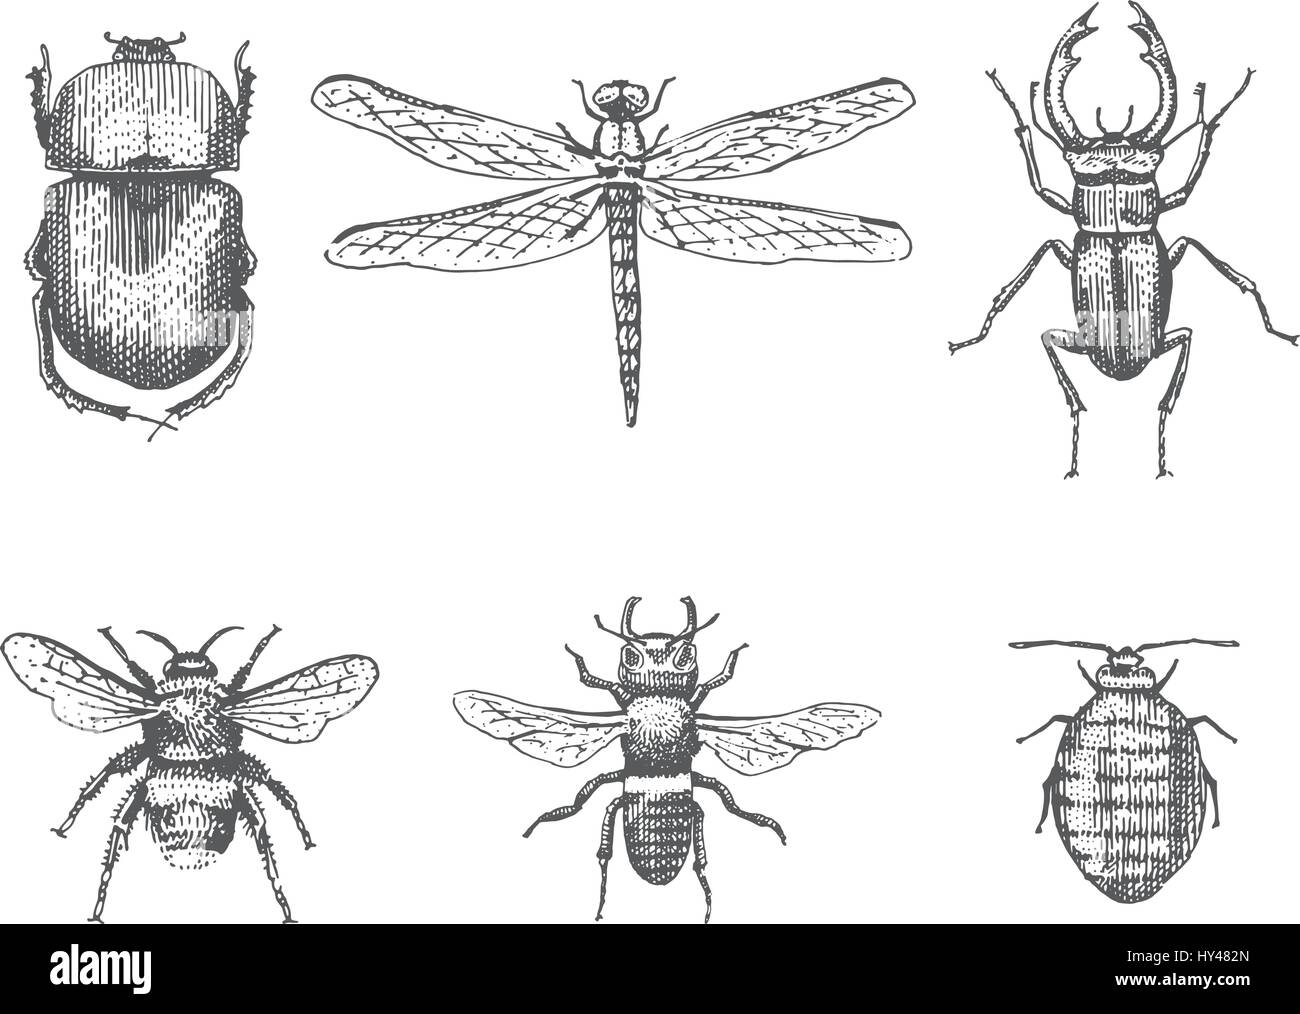 big set of insects bugs beetles and bees, fleas many species in vintage old hand drawn style engraved illustration woodcut animals Stock Vector